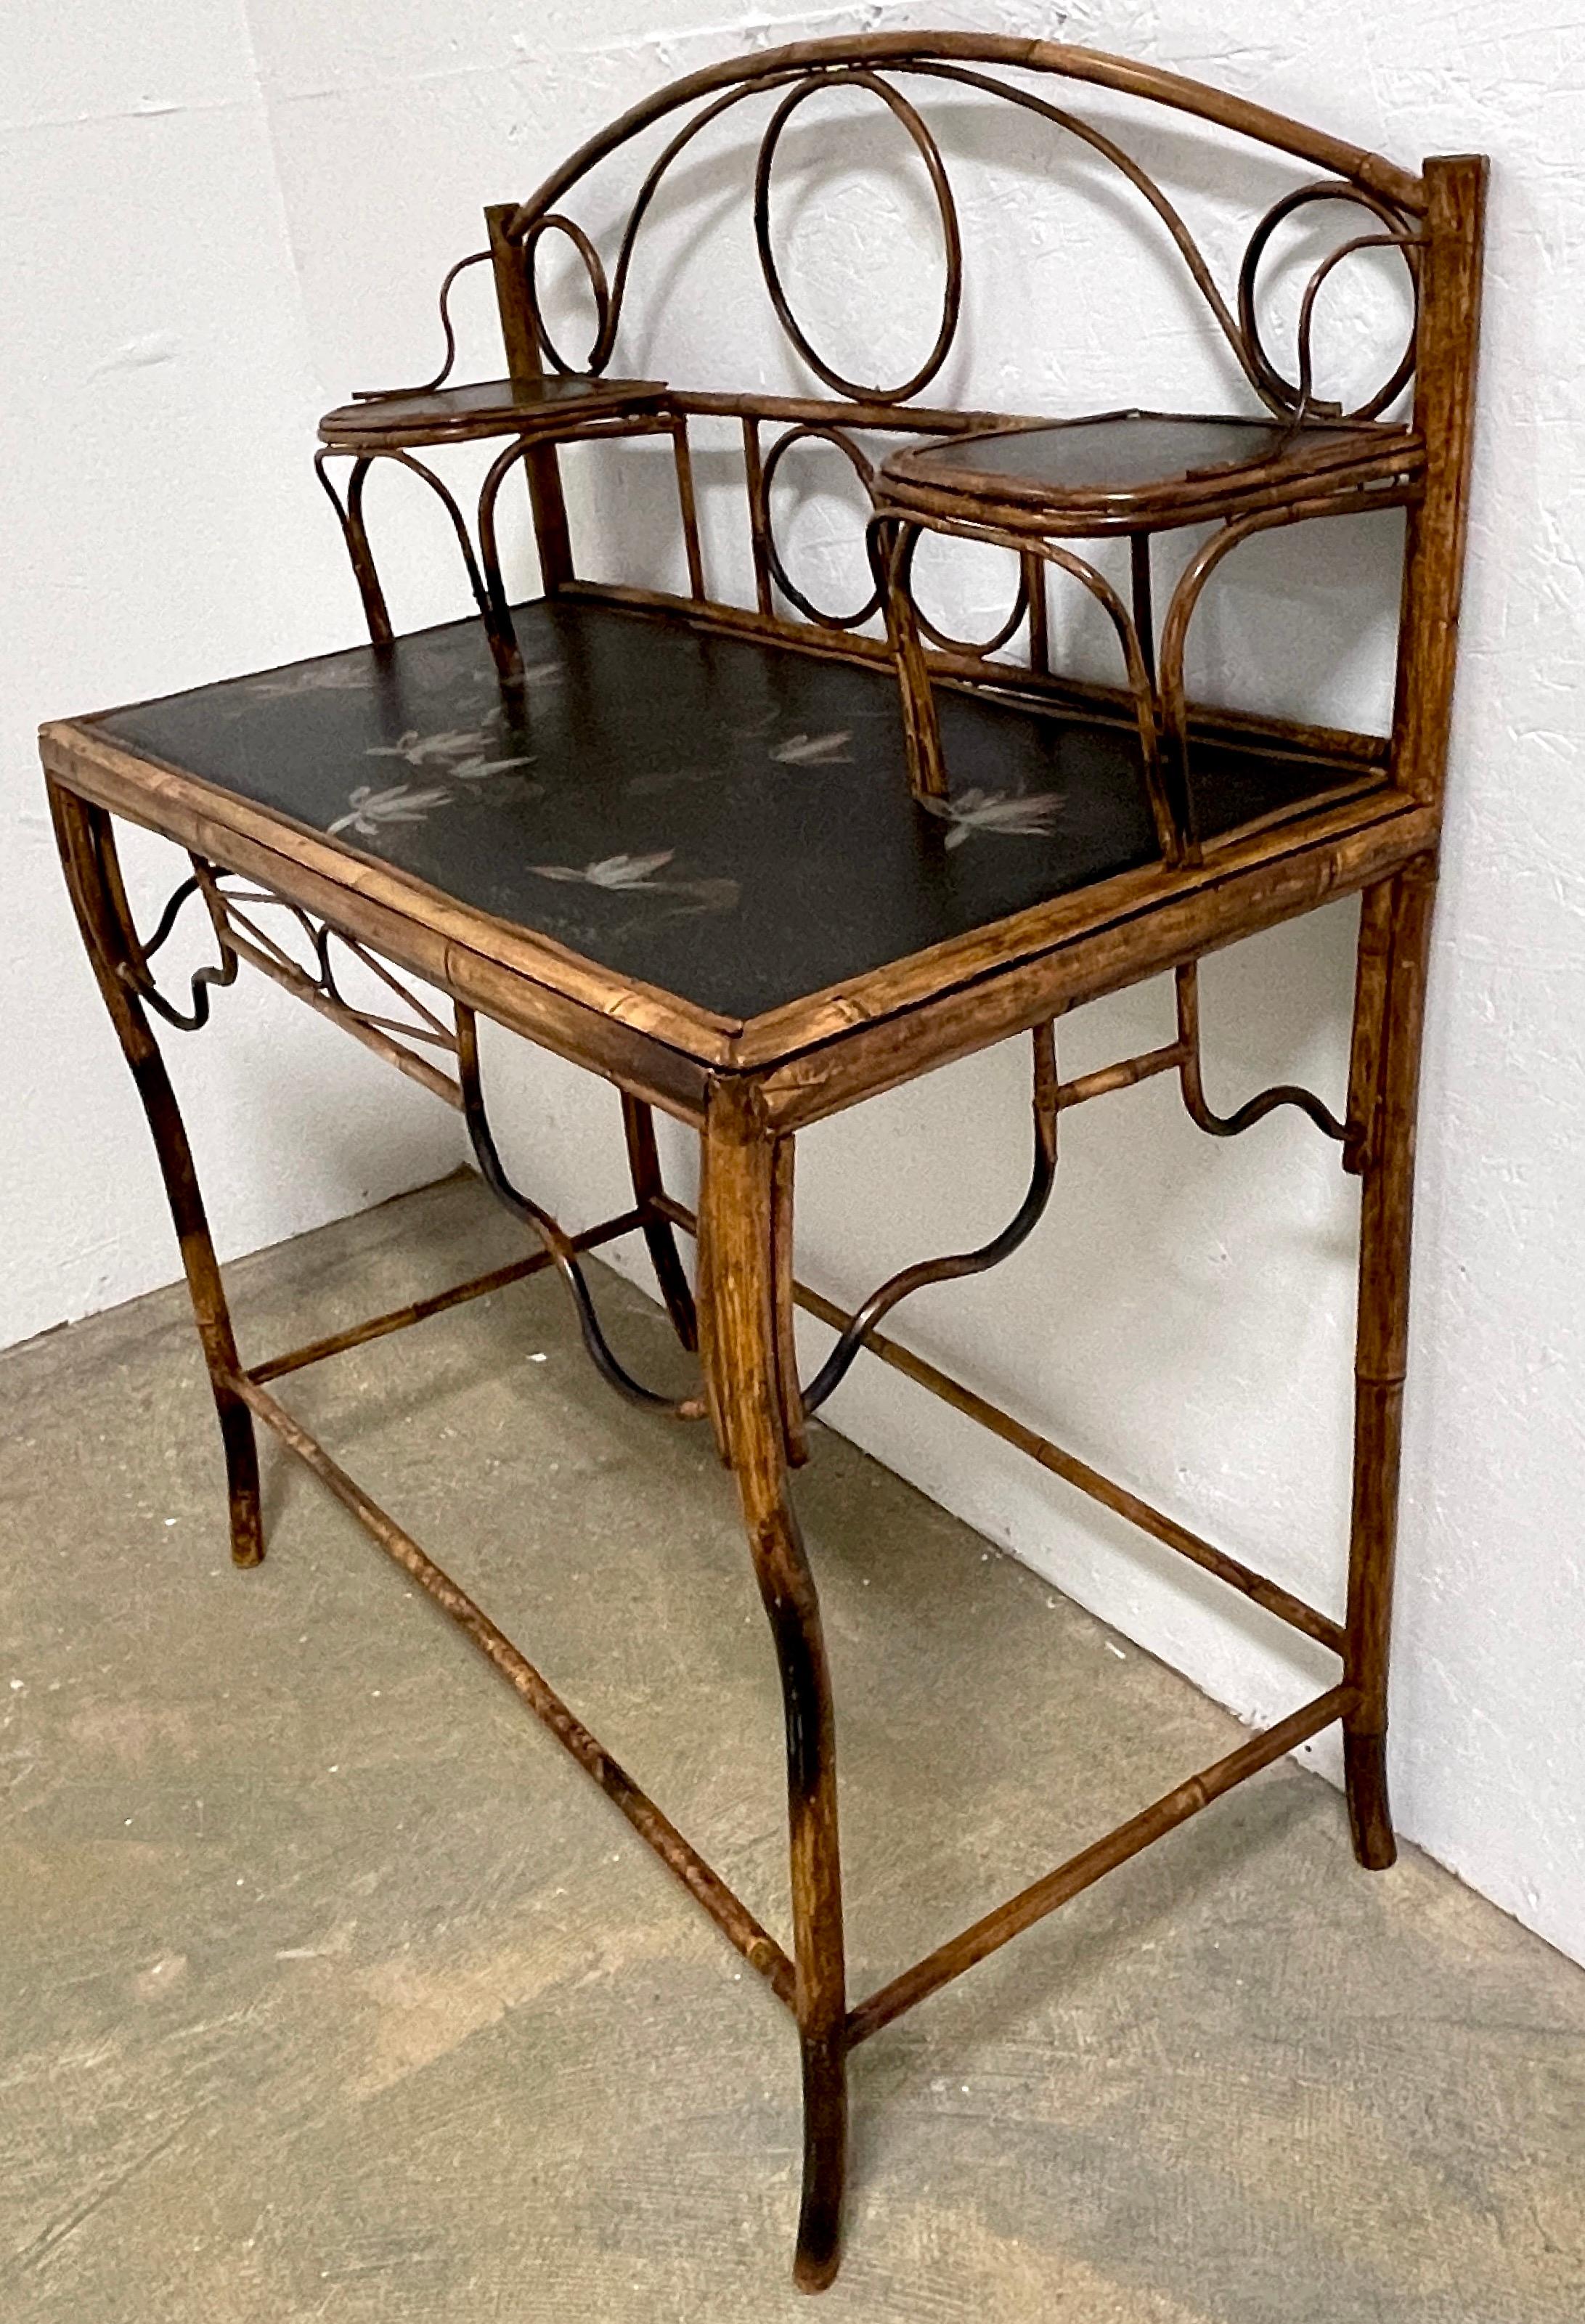 19th Century French Japonisme Bamboo Lacquered Desk/ Console Table, Signed 4